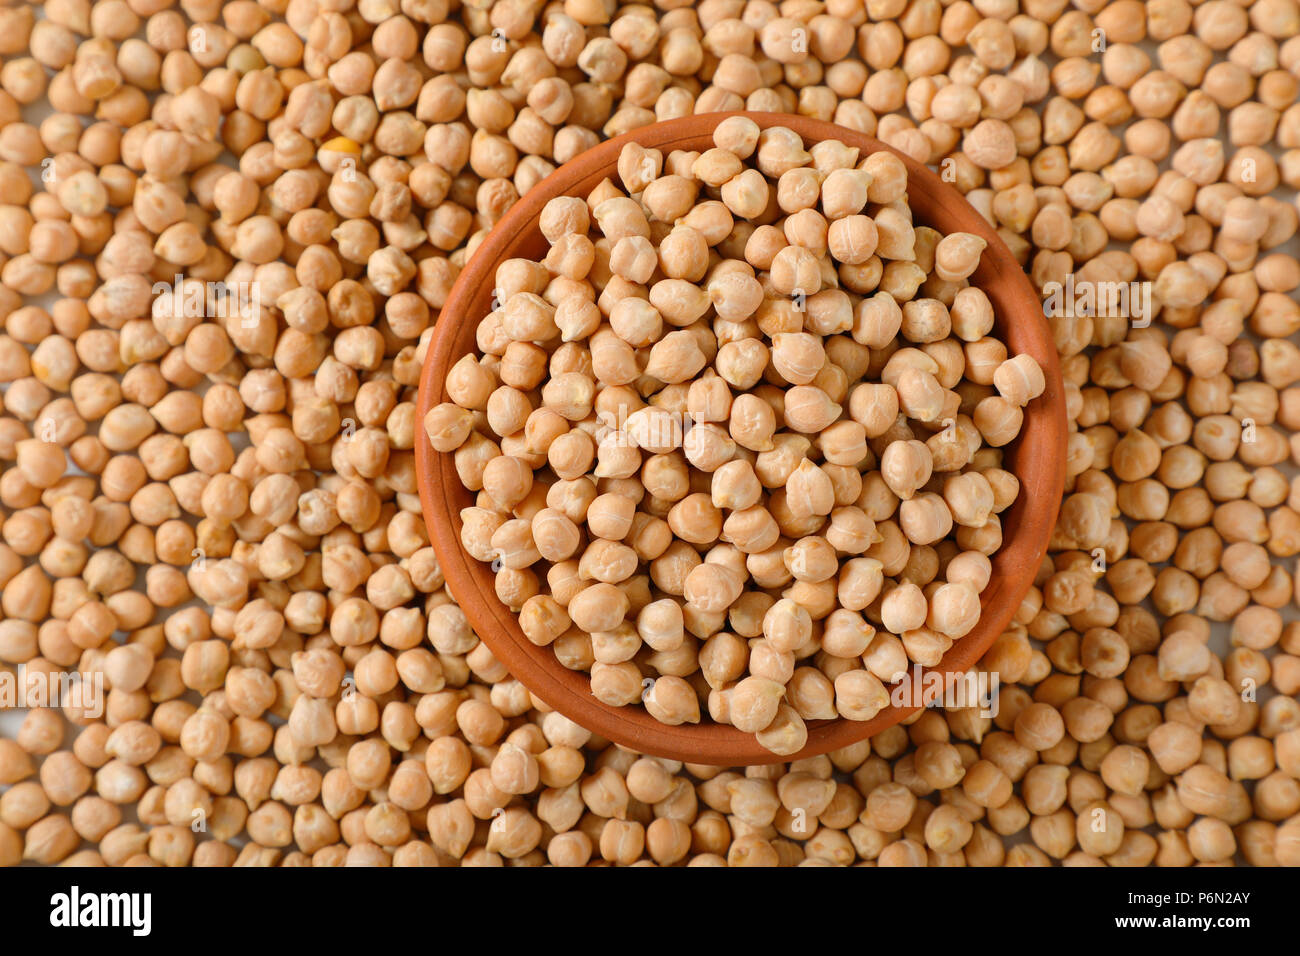 bowl of raw chickpeas on chickpeas background Stock Photo